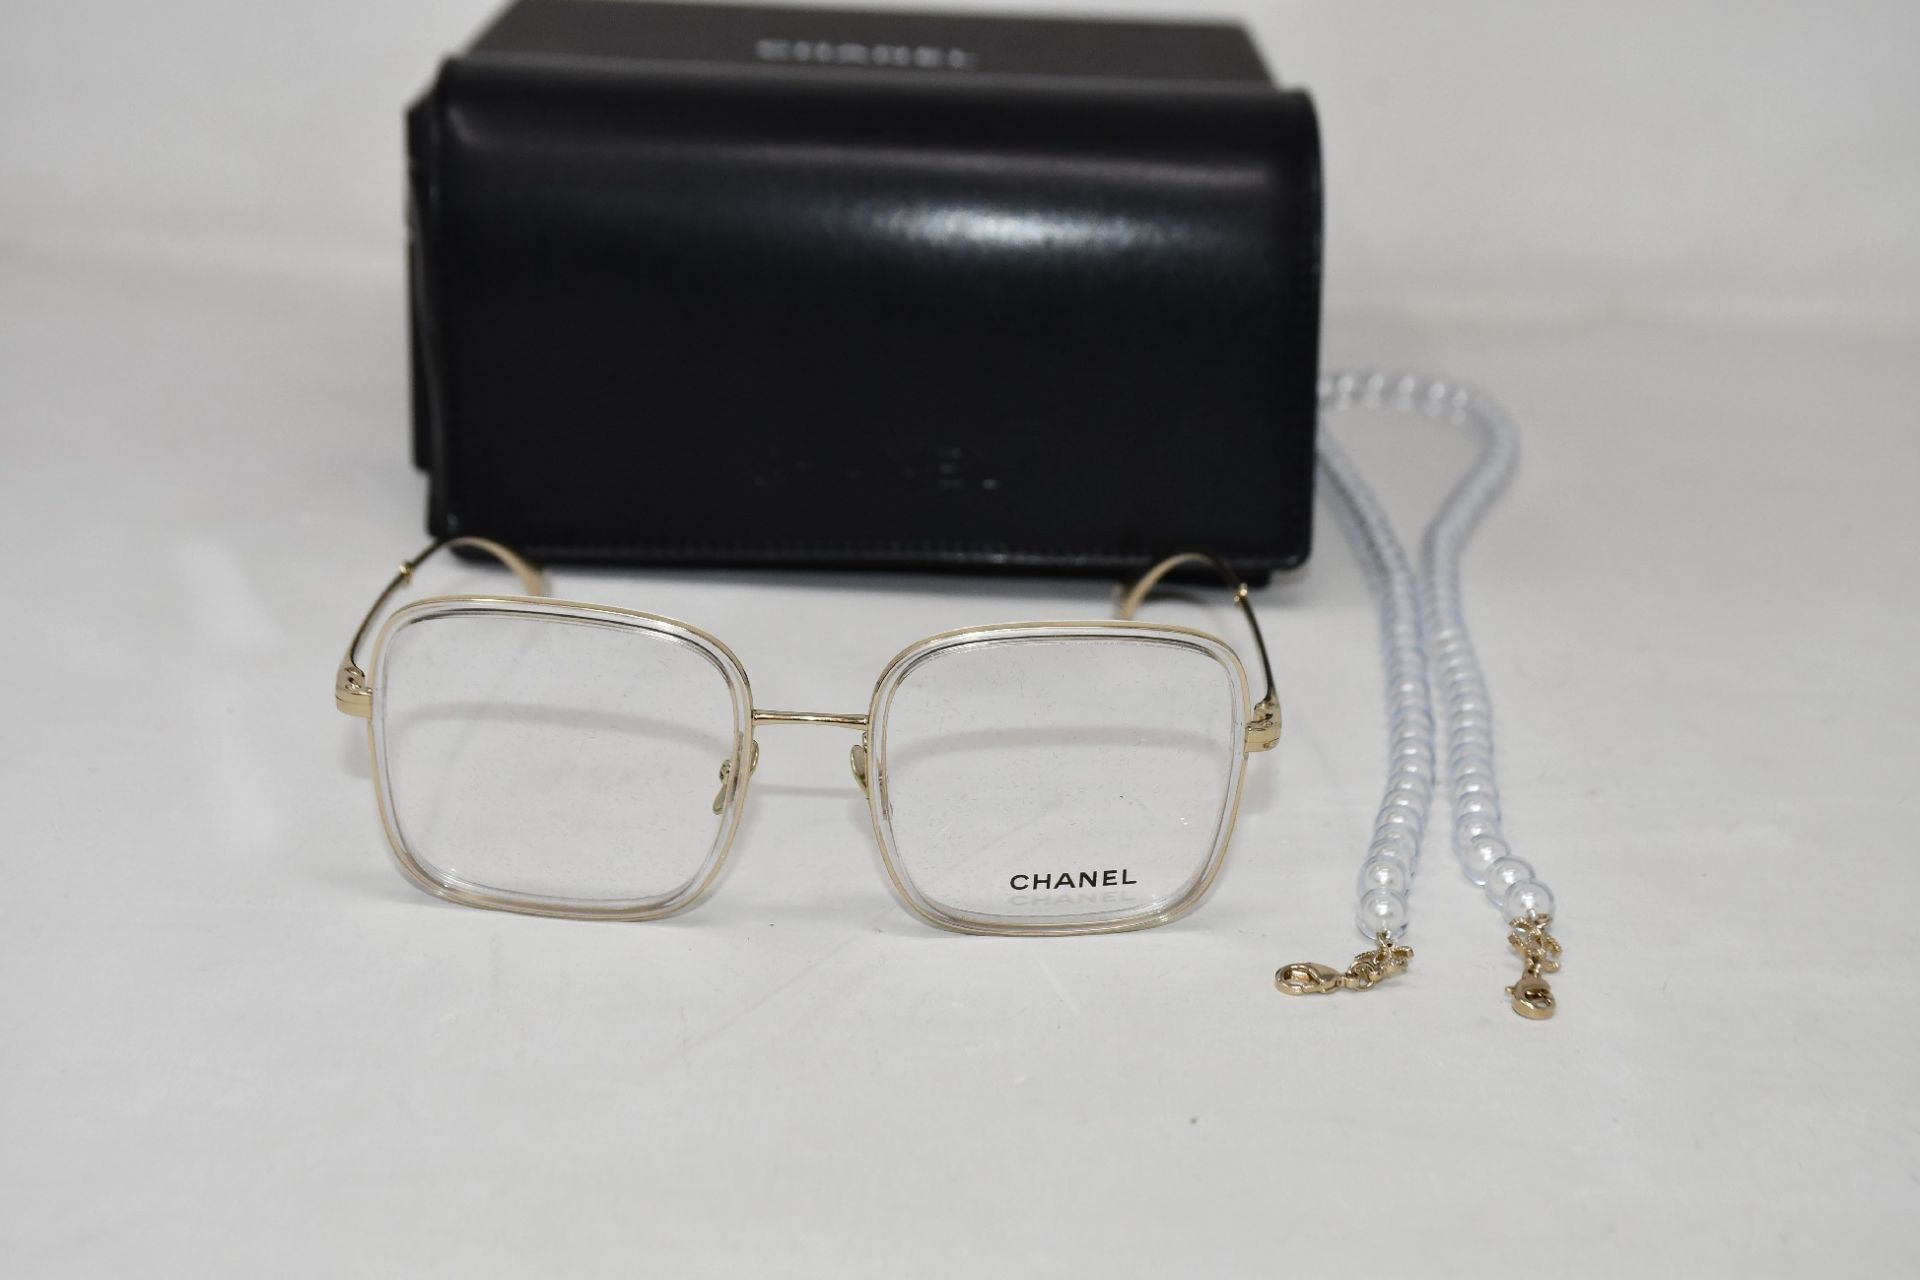 A pair of pre-owned Chanel 2195 Square Lens Eyeglasses with a Glass Pearl Glasses Chain, Comes